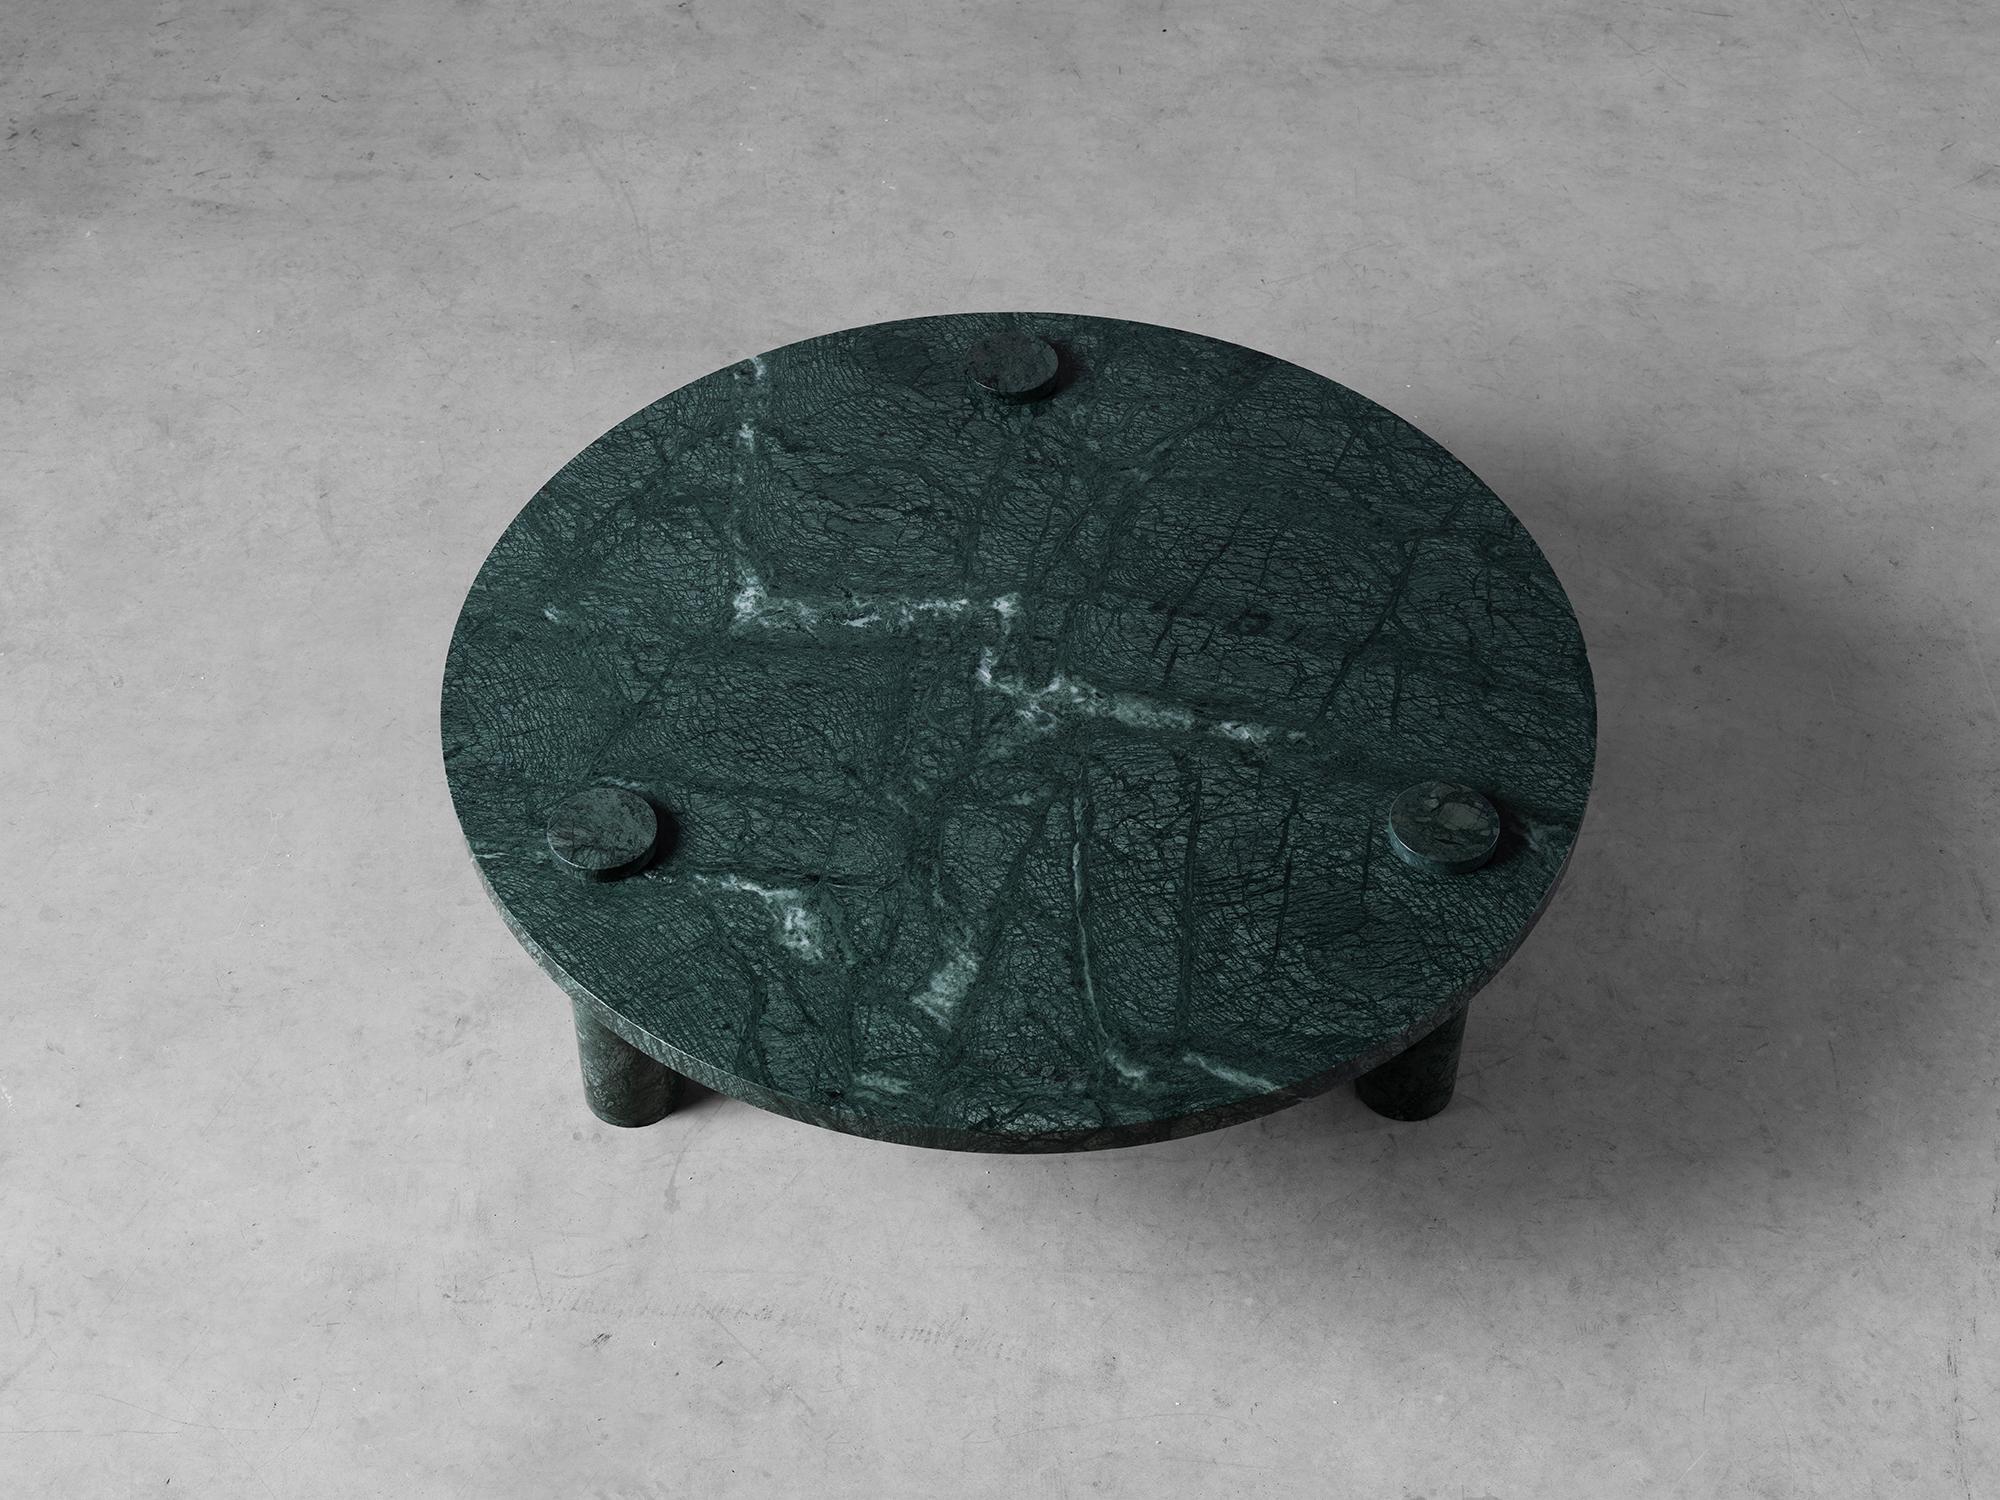 Sienna 100 coffee table by Agglomerati 
Dimensions: W 100 x H 33 cm 
Materials: Green Guatemala Marble

Agglomerati is a London-based studio creating distinctive stone furniture. Established in 2019 by Australian designer Sam Henley, the studio